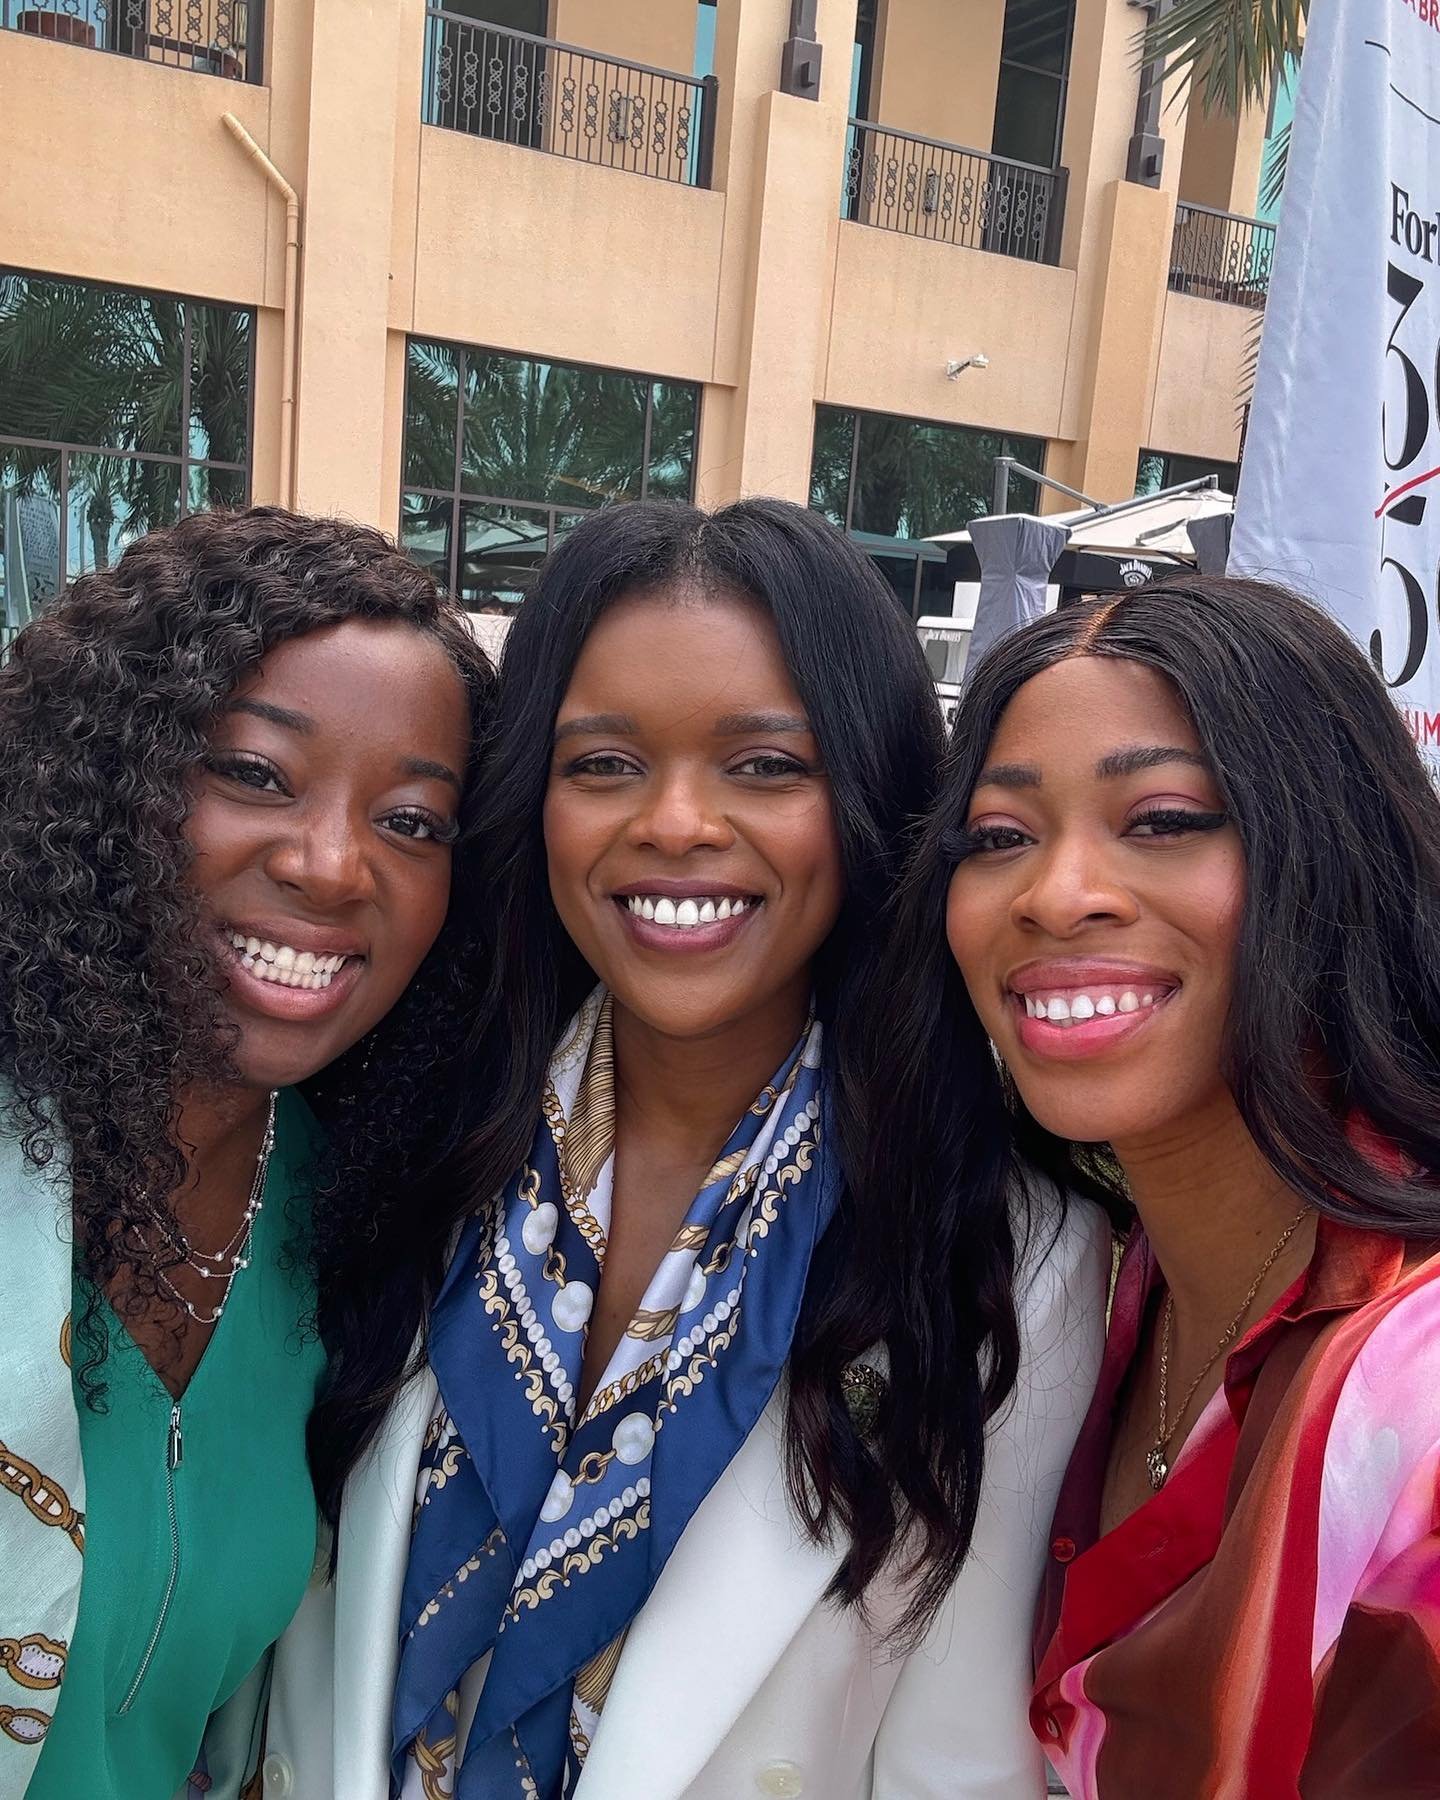 Missing the @Forbes 30/50 Summit &amp; all these amazing ladies! 🤍

______

#blackgirlmagic #forbes #forbesunder30 #forbesunder30summit #forbes30under30 #forbes3050 #forbes3050summit #forbes3050abudhabi #christian #christianblogger #christianwomen #